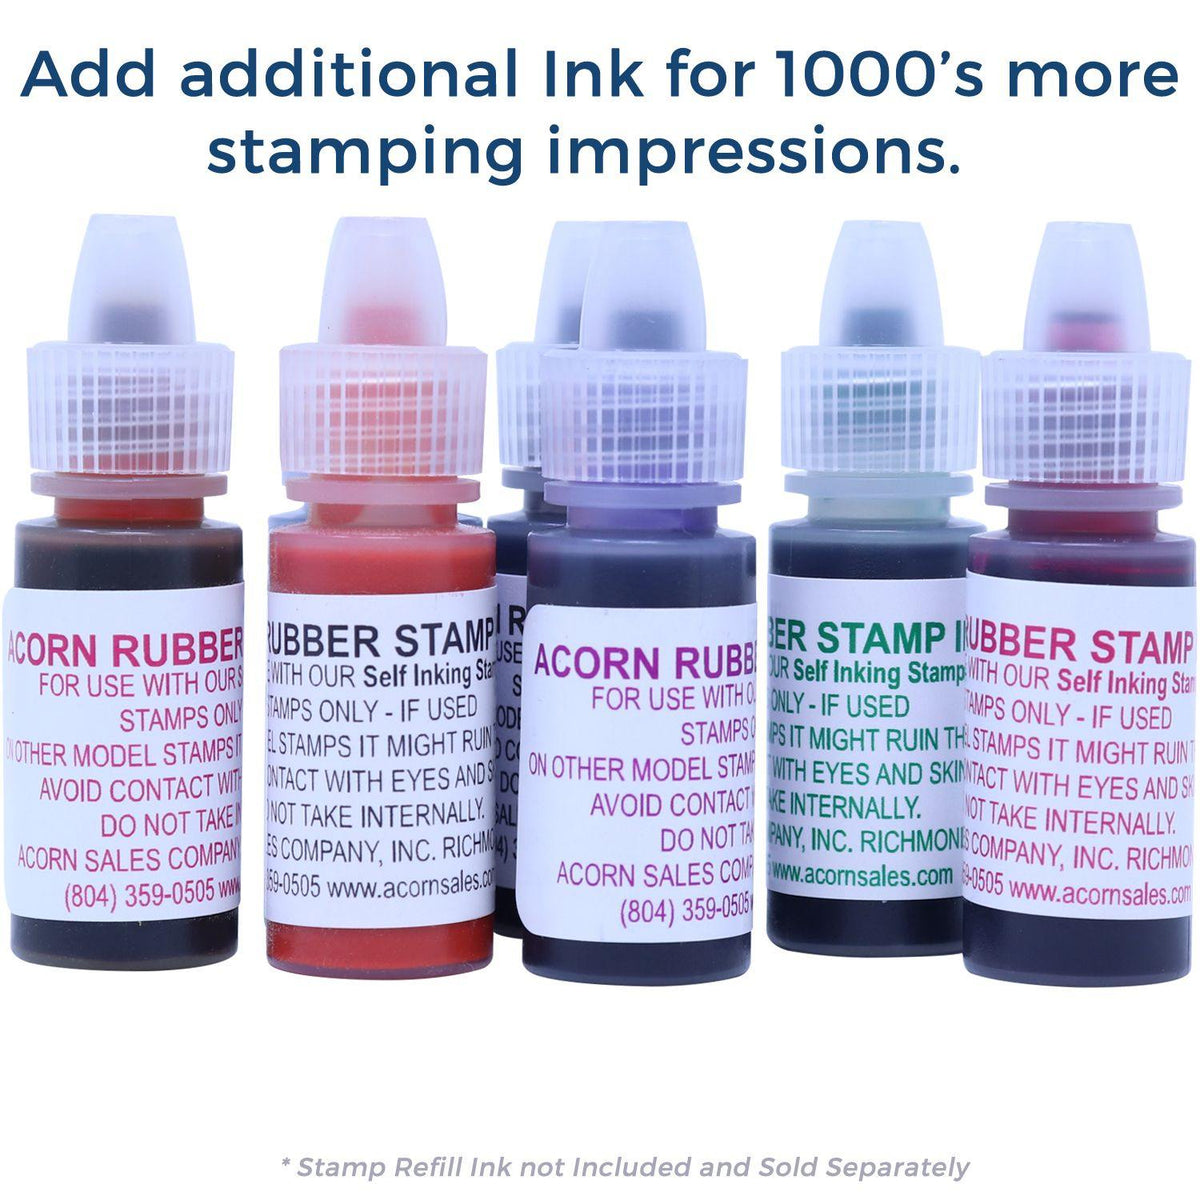 Refill Inks for Large Pre-Inked Faxed with Date Box Stamp Available